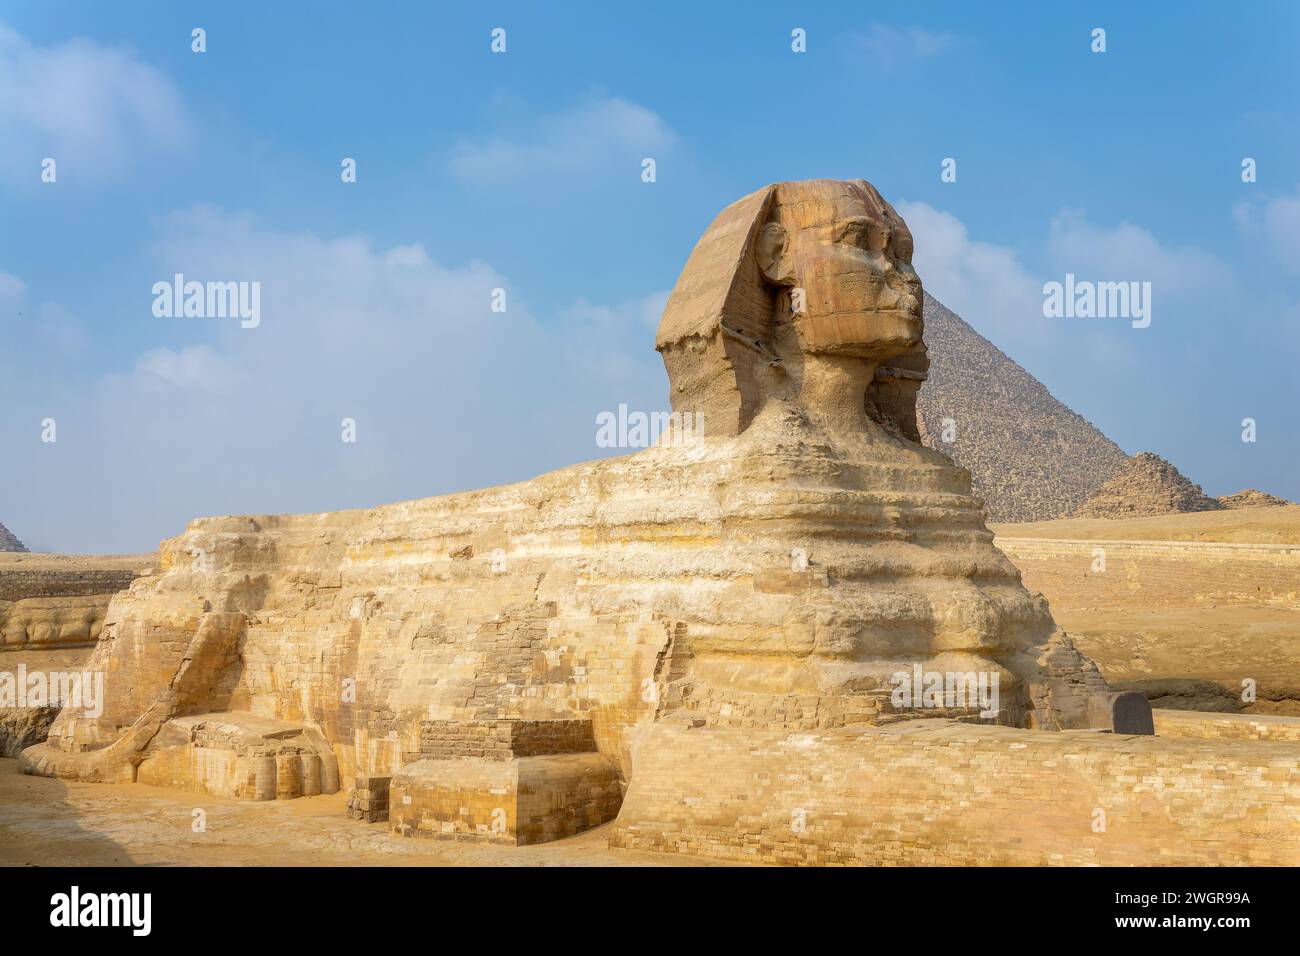 Side view of The Great Sphinx of Giza, Cairo, Egypt Stock Photo